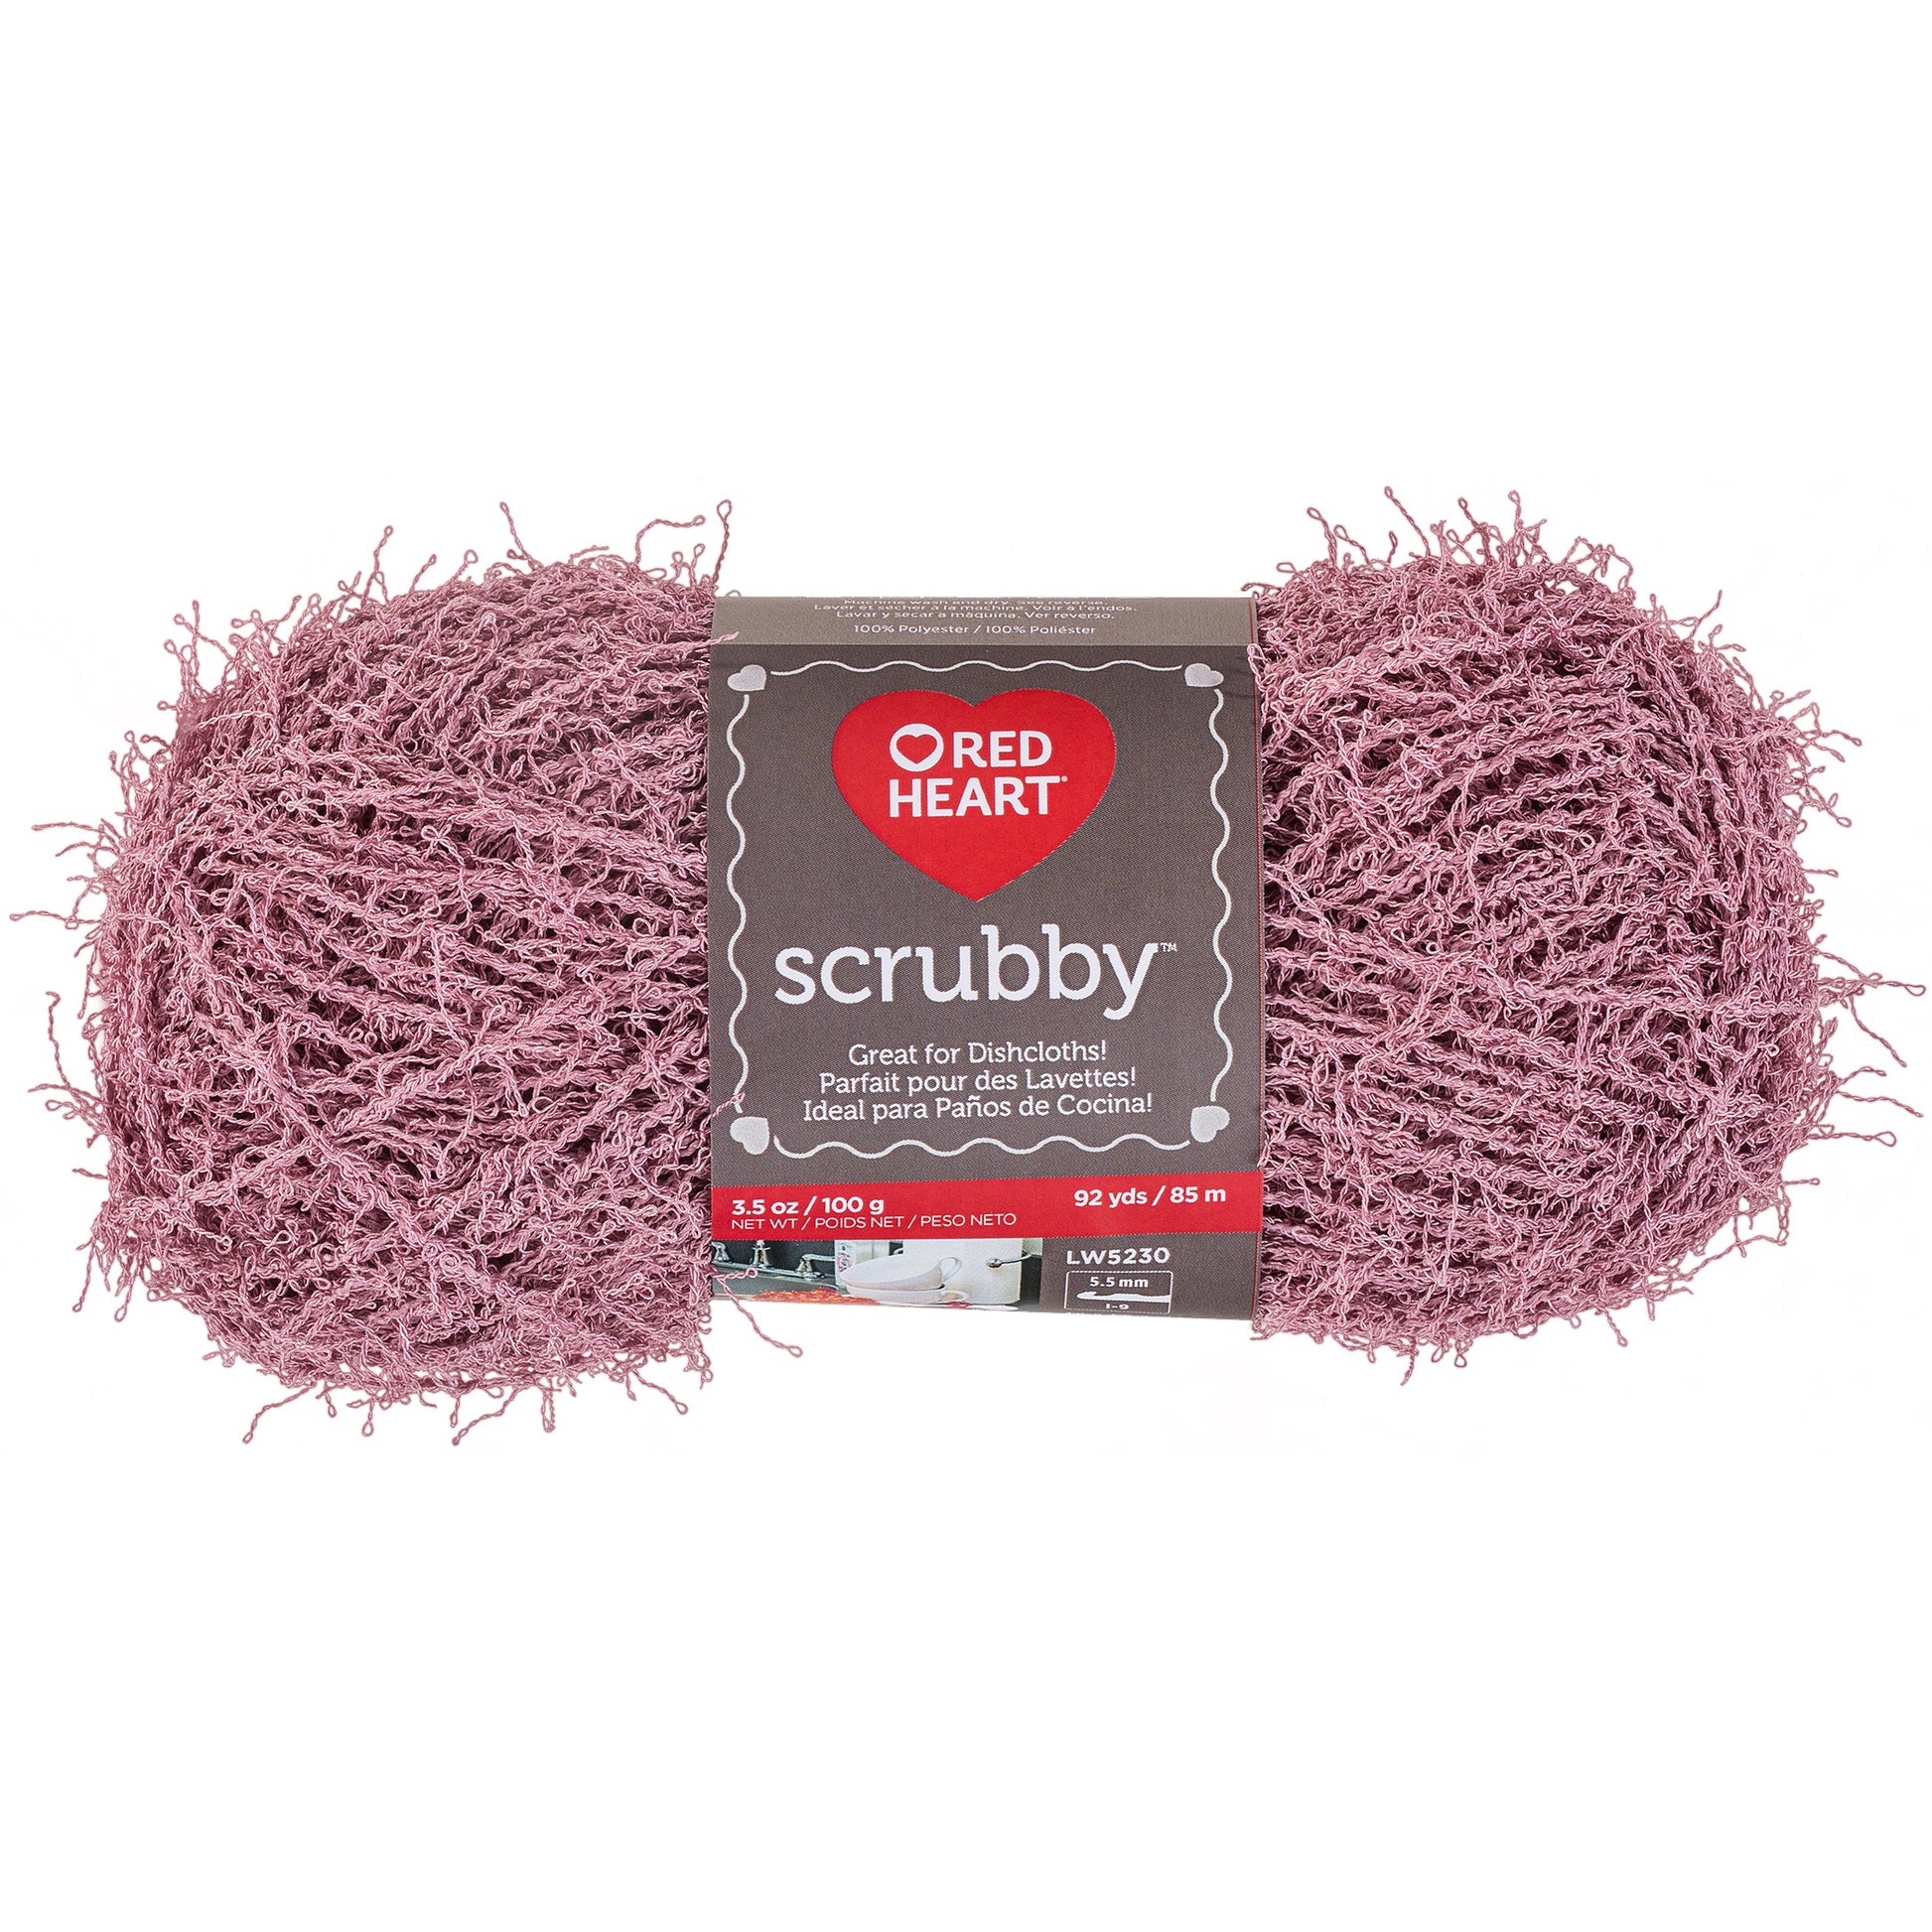 Red Heart's Scrubby - Gabrielle Knits